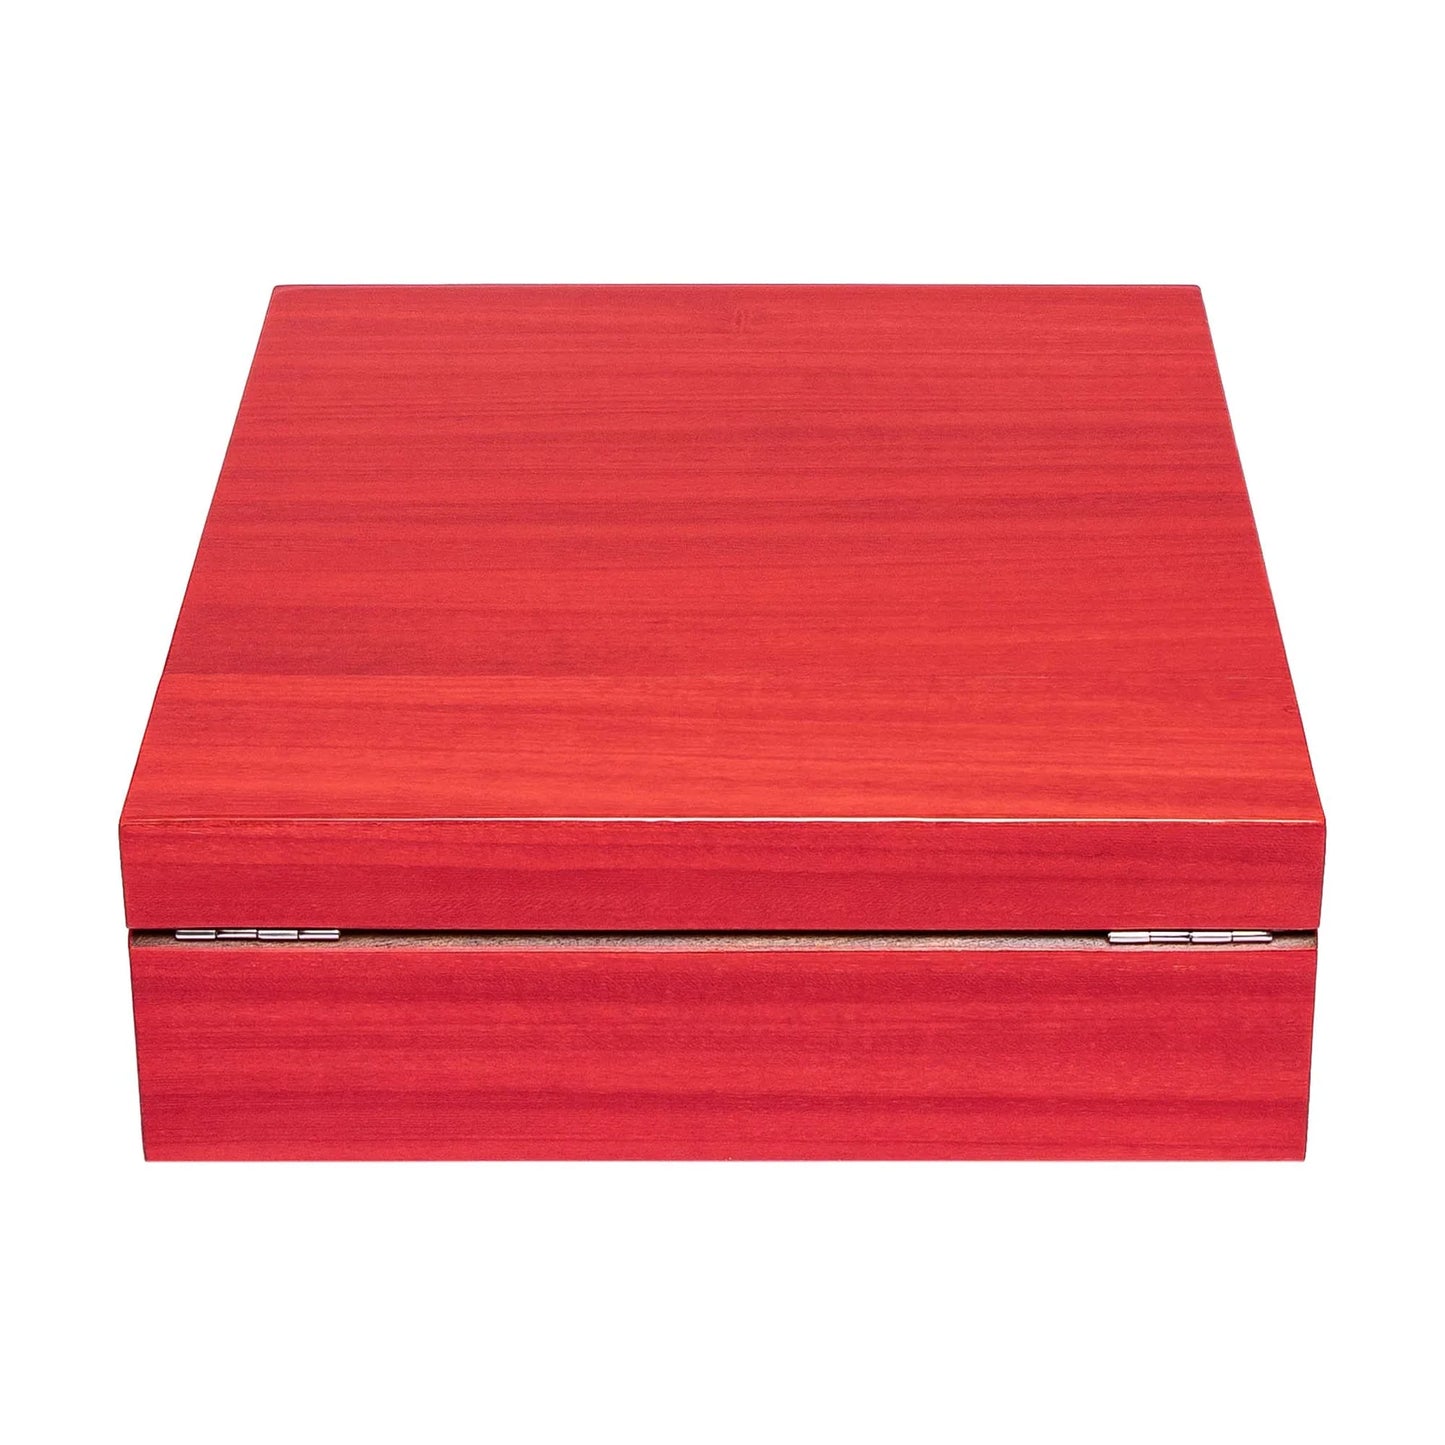 Heritage 4 Watch Collector Box - Red